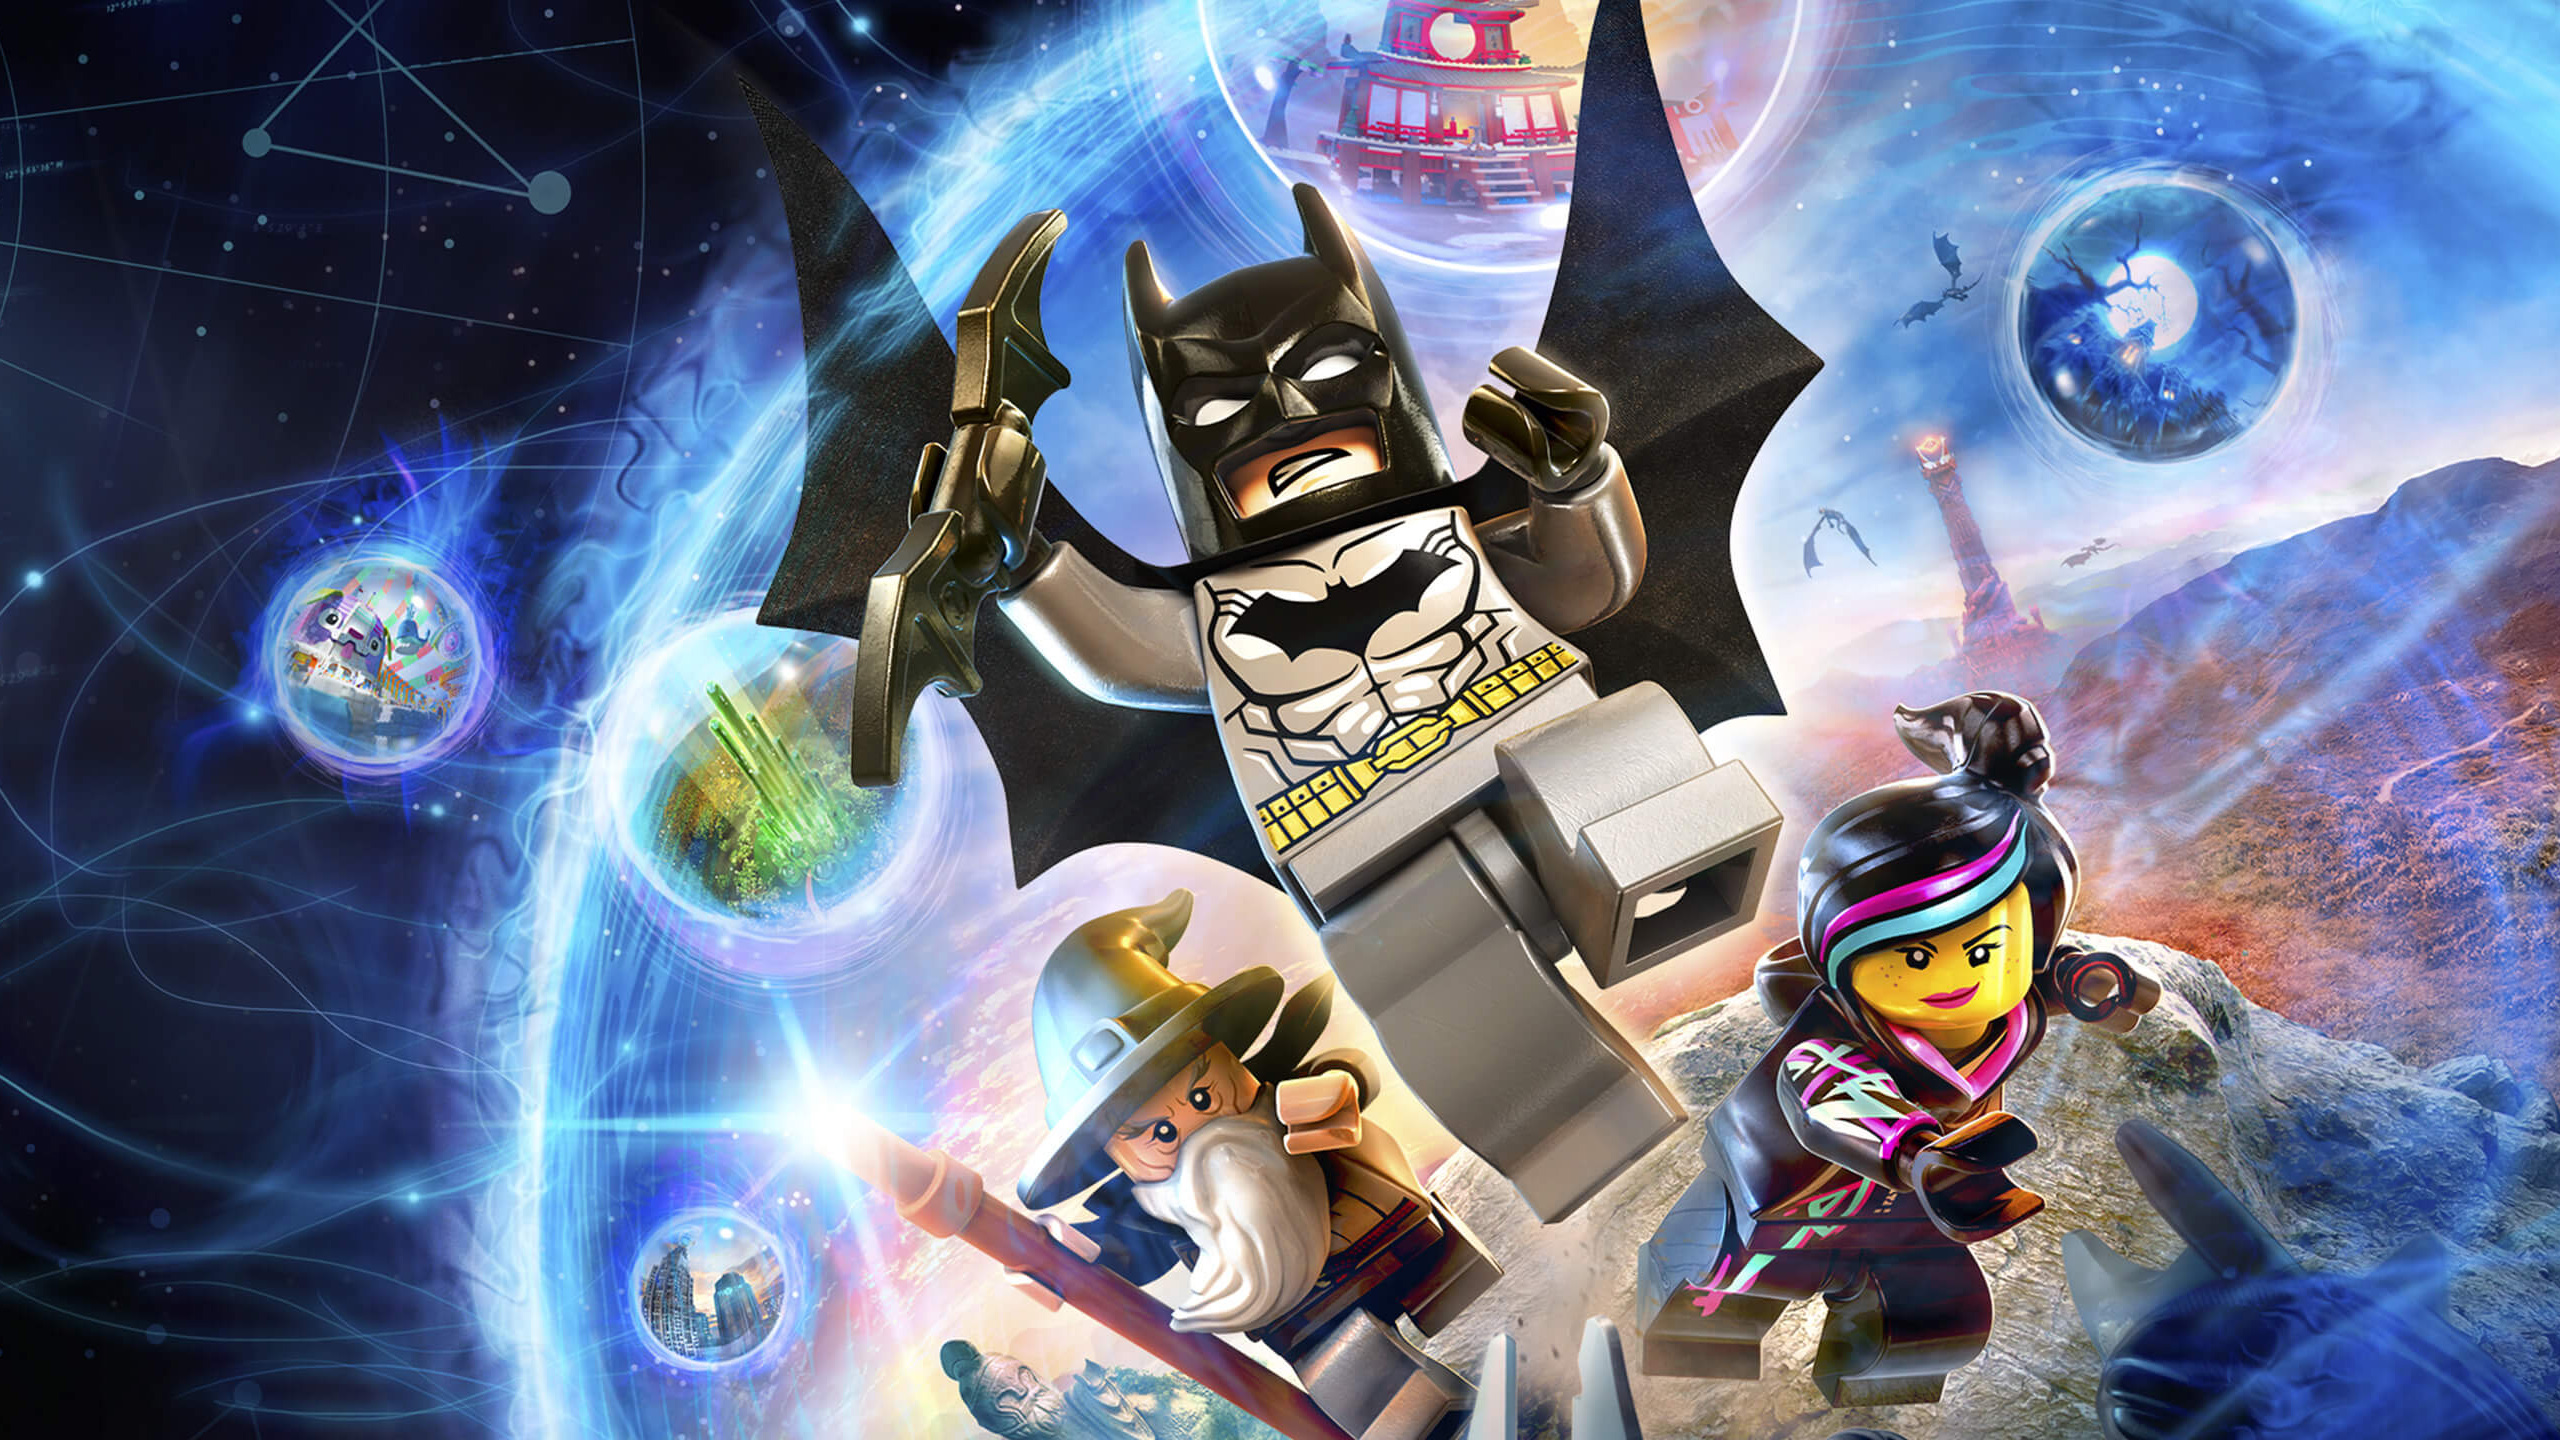 LEGO Dimensions 2015 Wallpapers HD Wallpapers 2560x1440